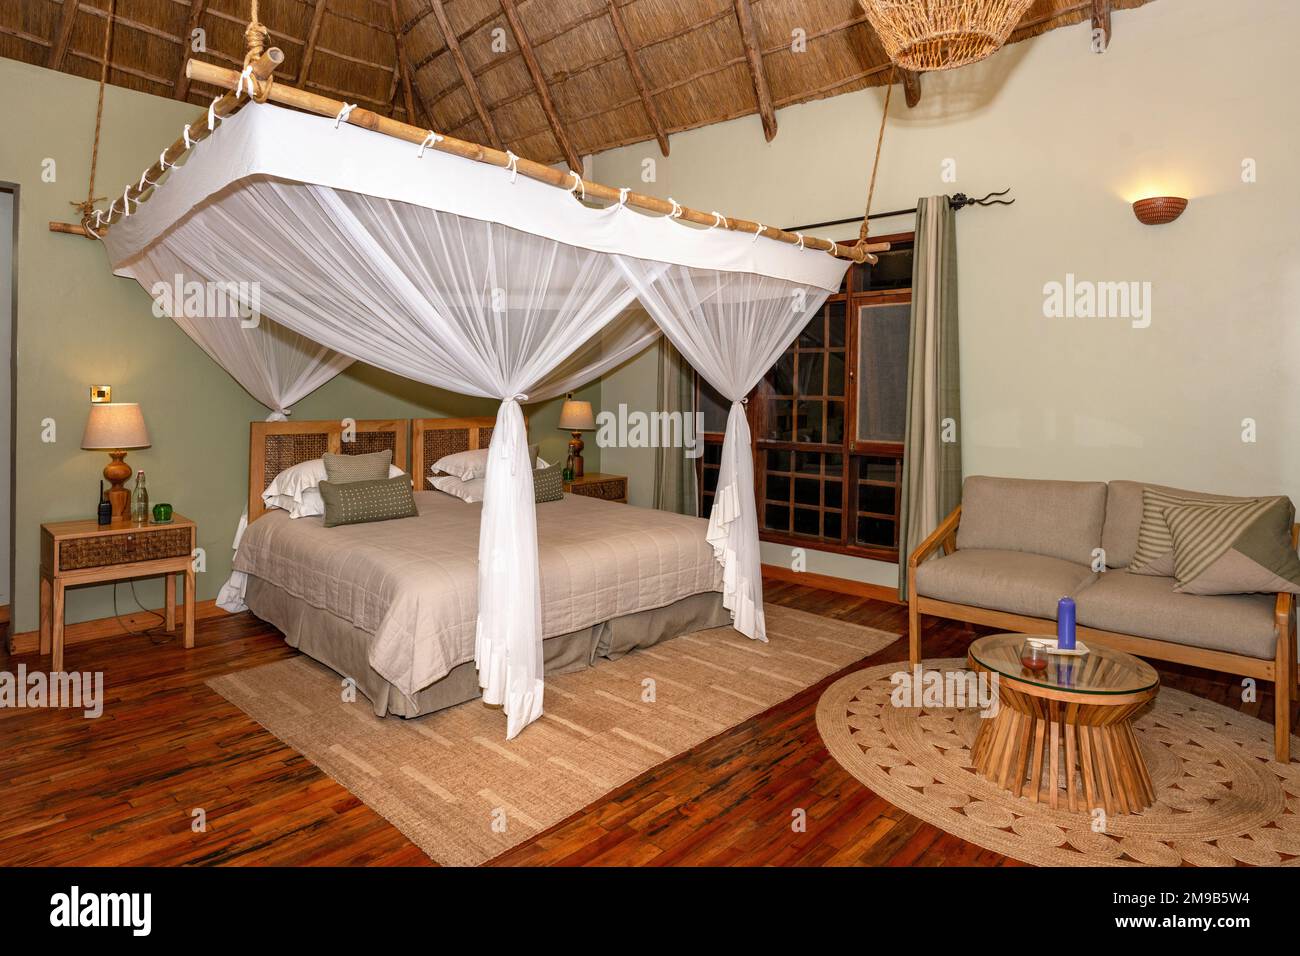 The main bedroom area of the cottage accommodation at Primate Lodge, Kibale National Park, Uganda. Stock Photo